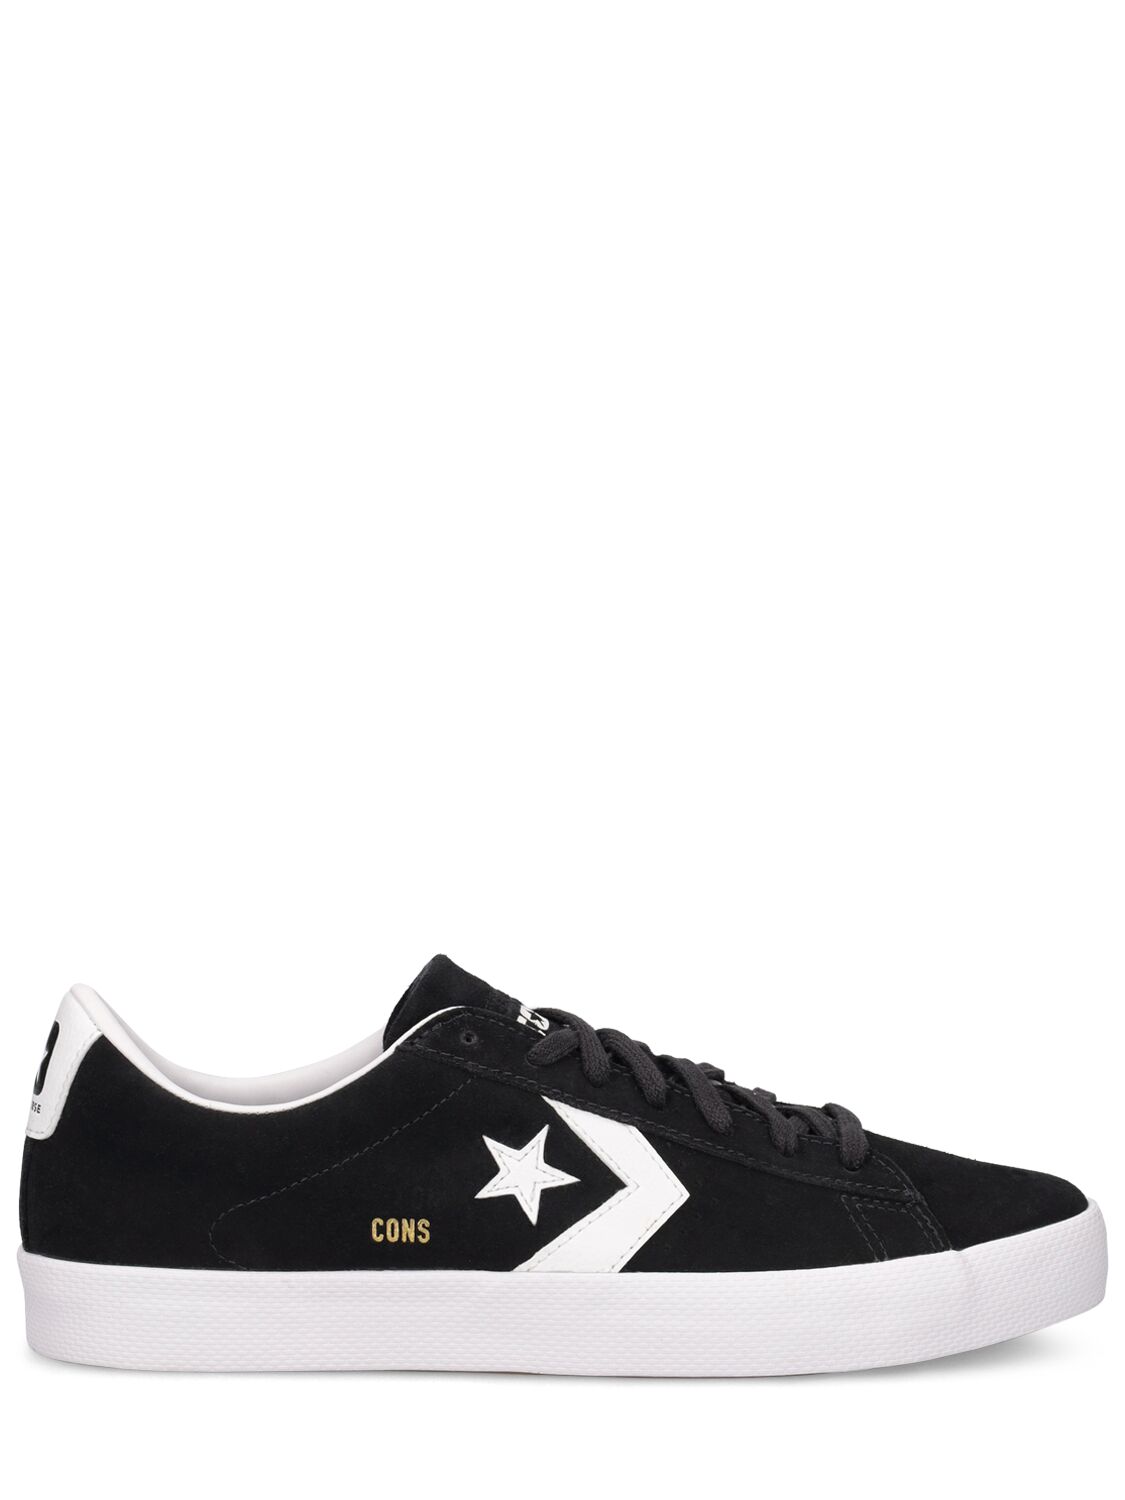 Image of Cons Pro Leather Vulcanized Sneakers